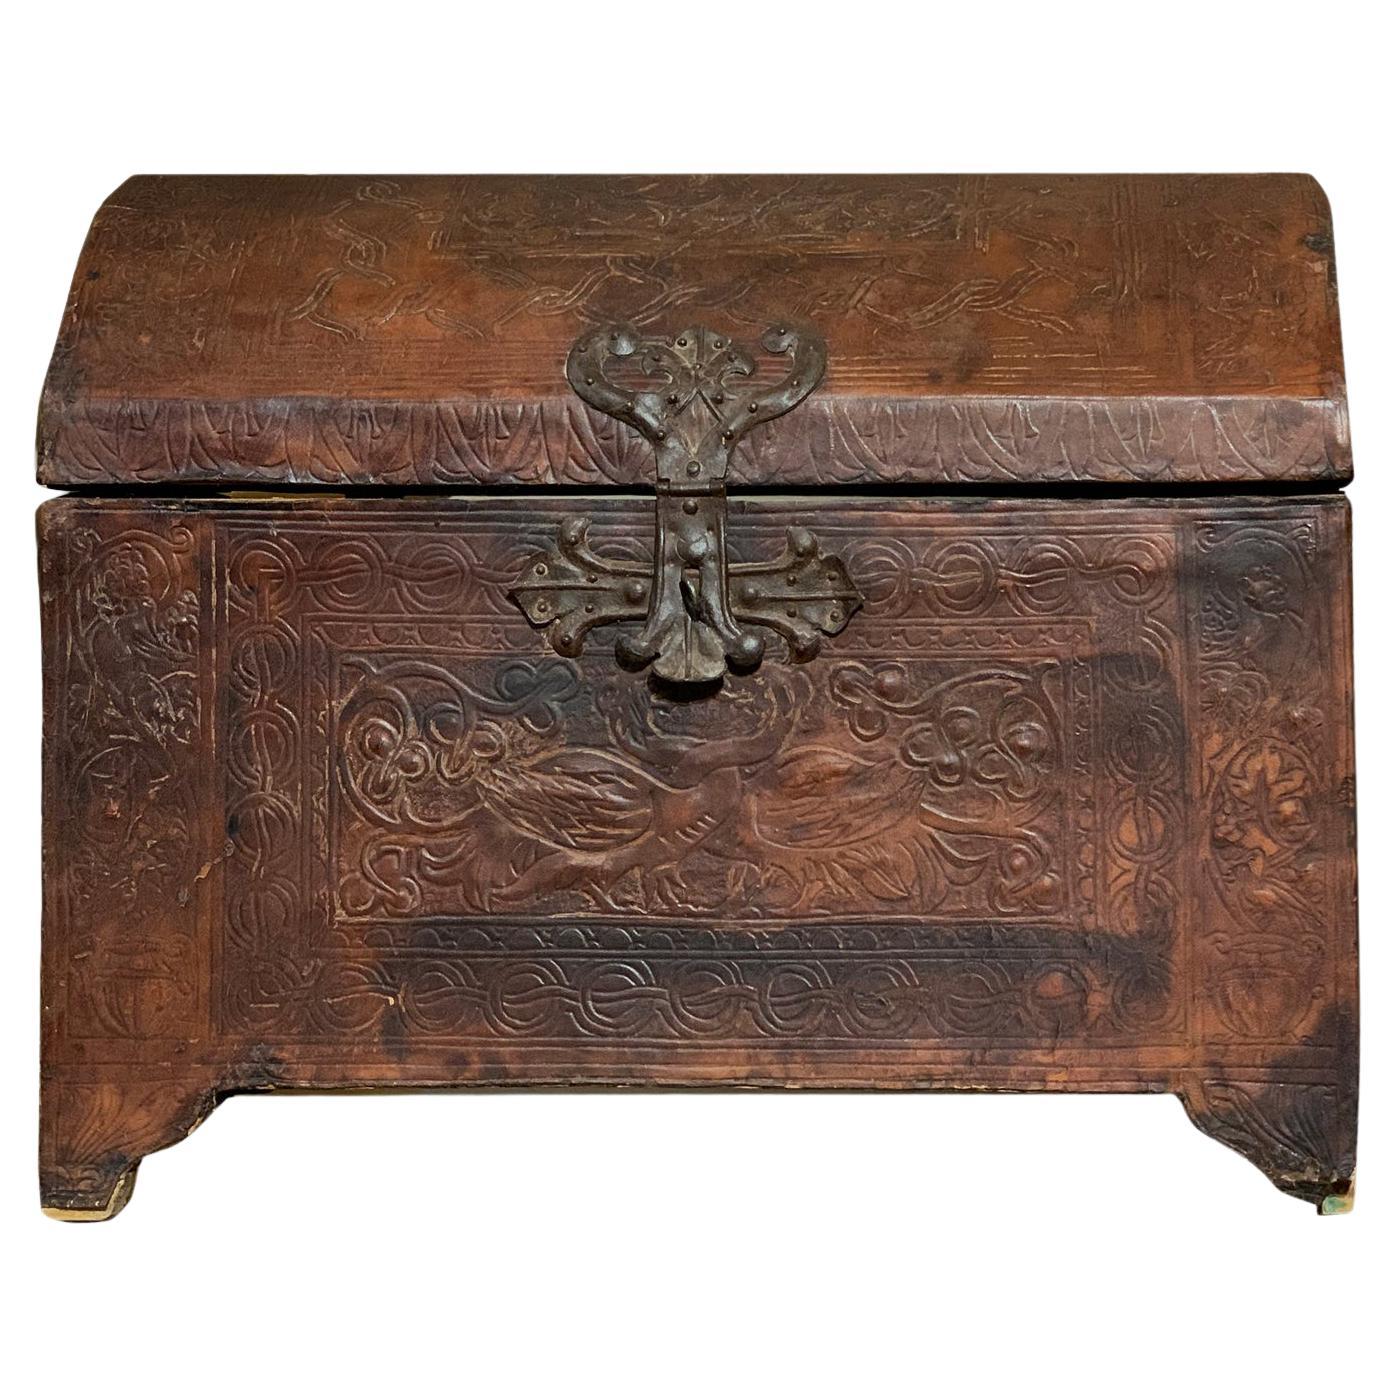 17th CENTURY LEATHER CANDLE CASE For Sale